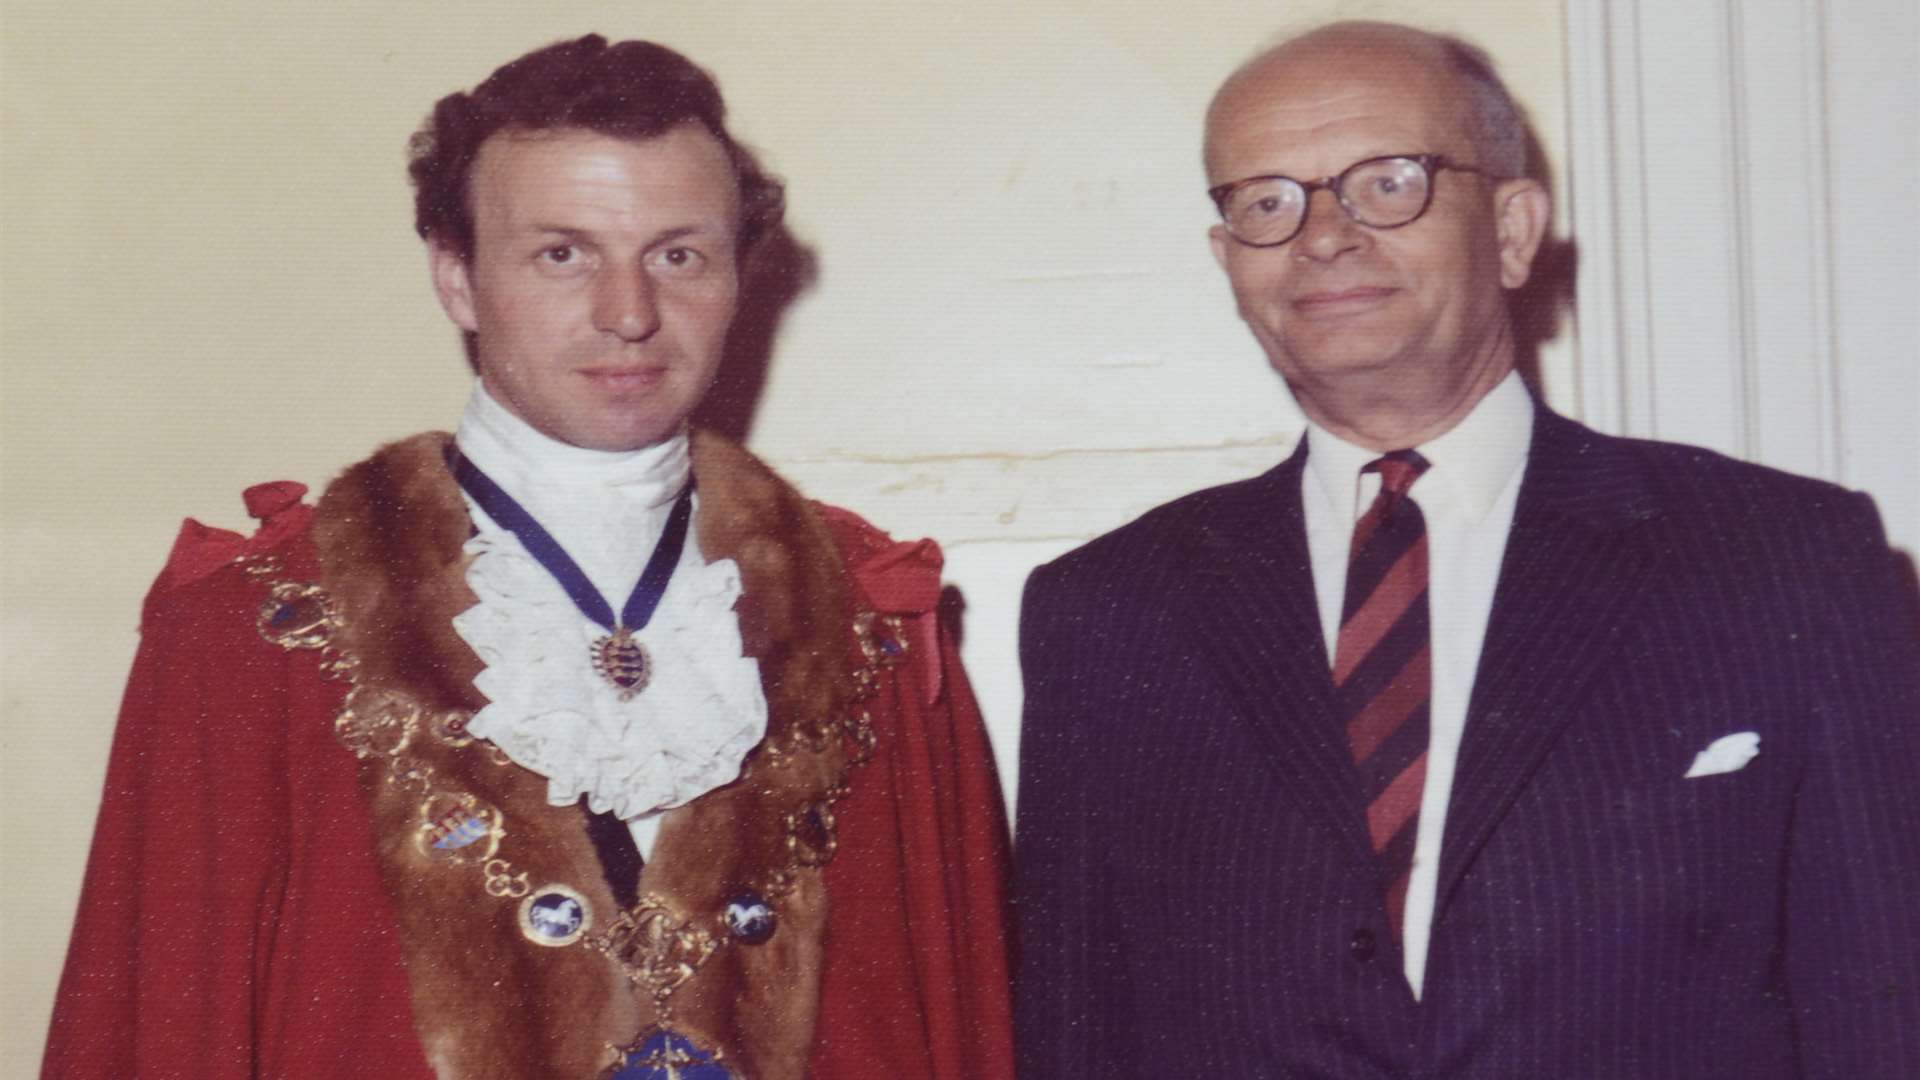 Mr Capon was the youngest Mayor of Hythe in the town's history aged 34. He is pictured here in 1973 with General Lassells the Queen's cousin